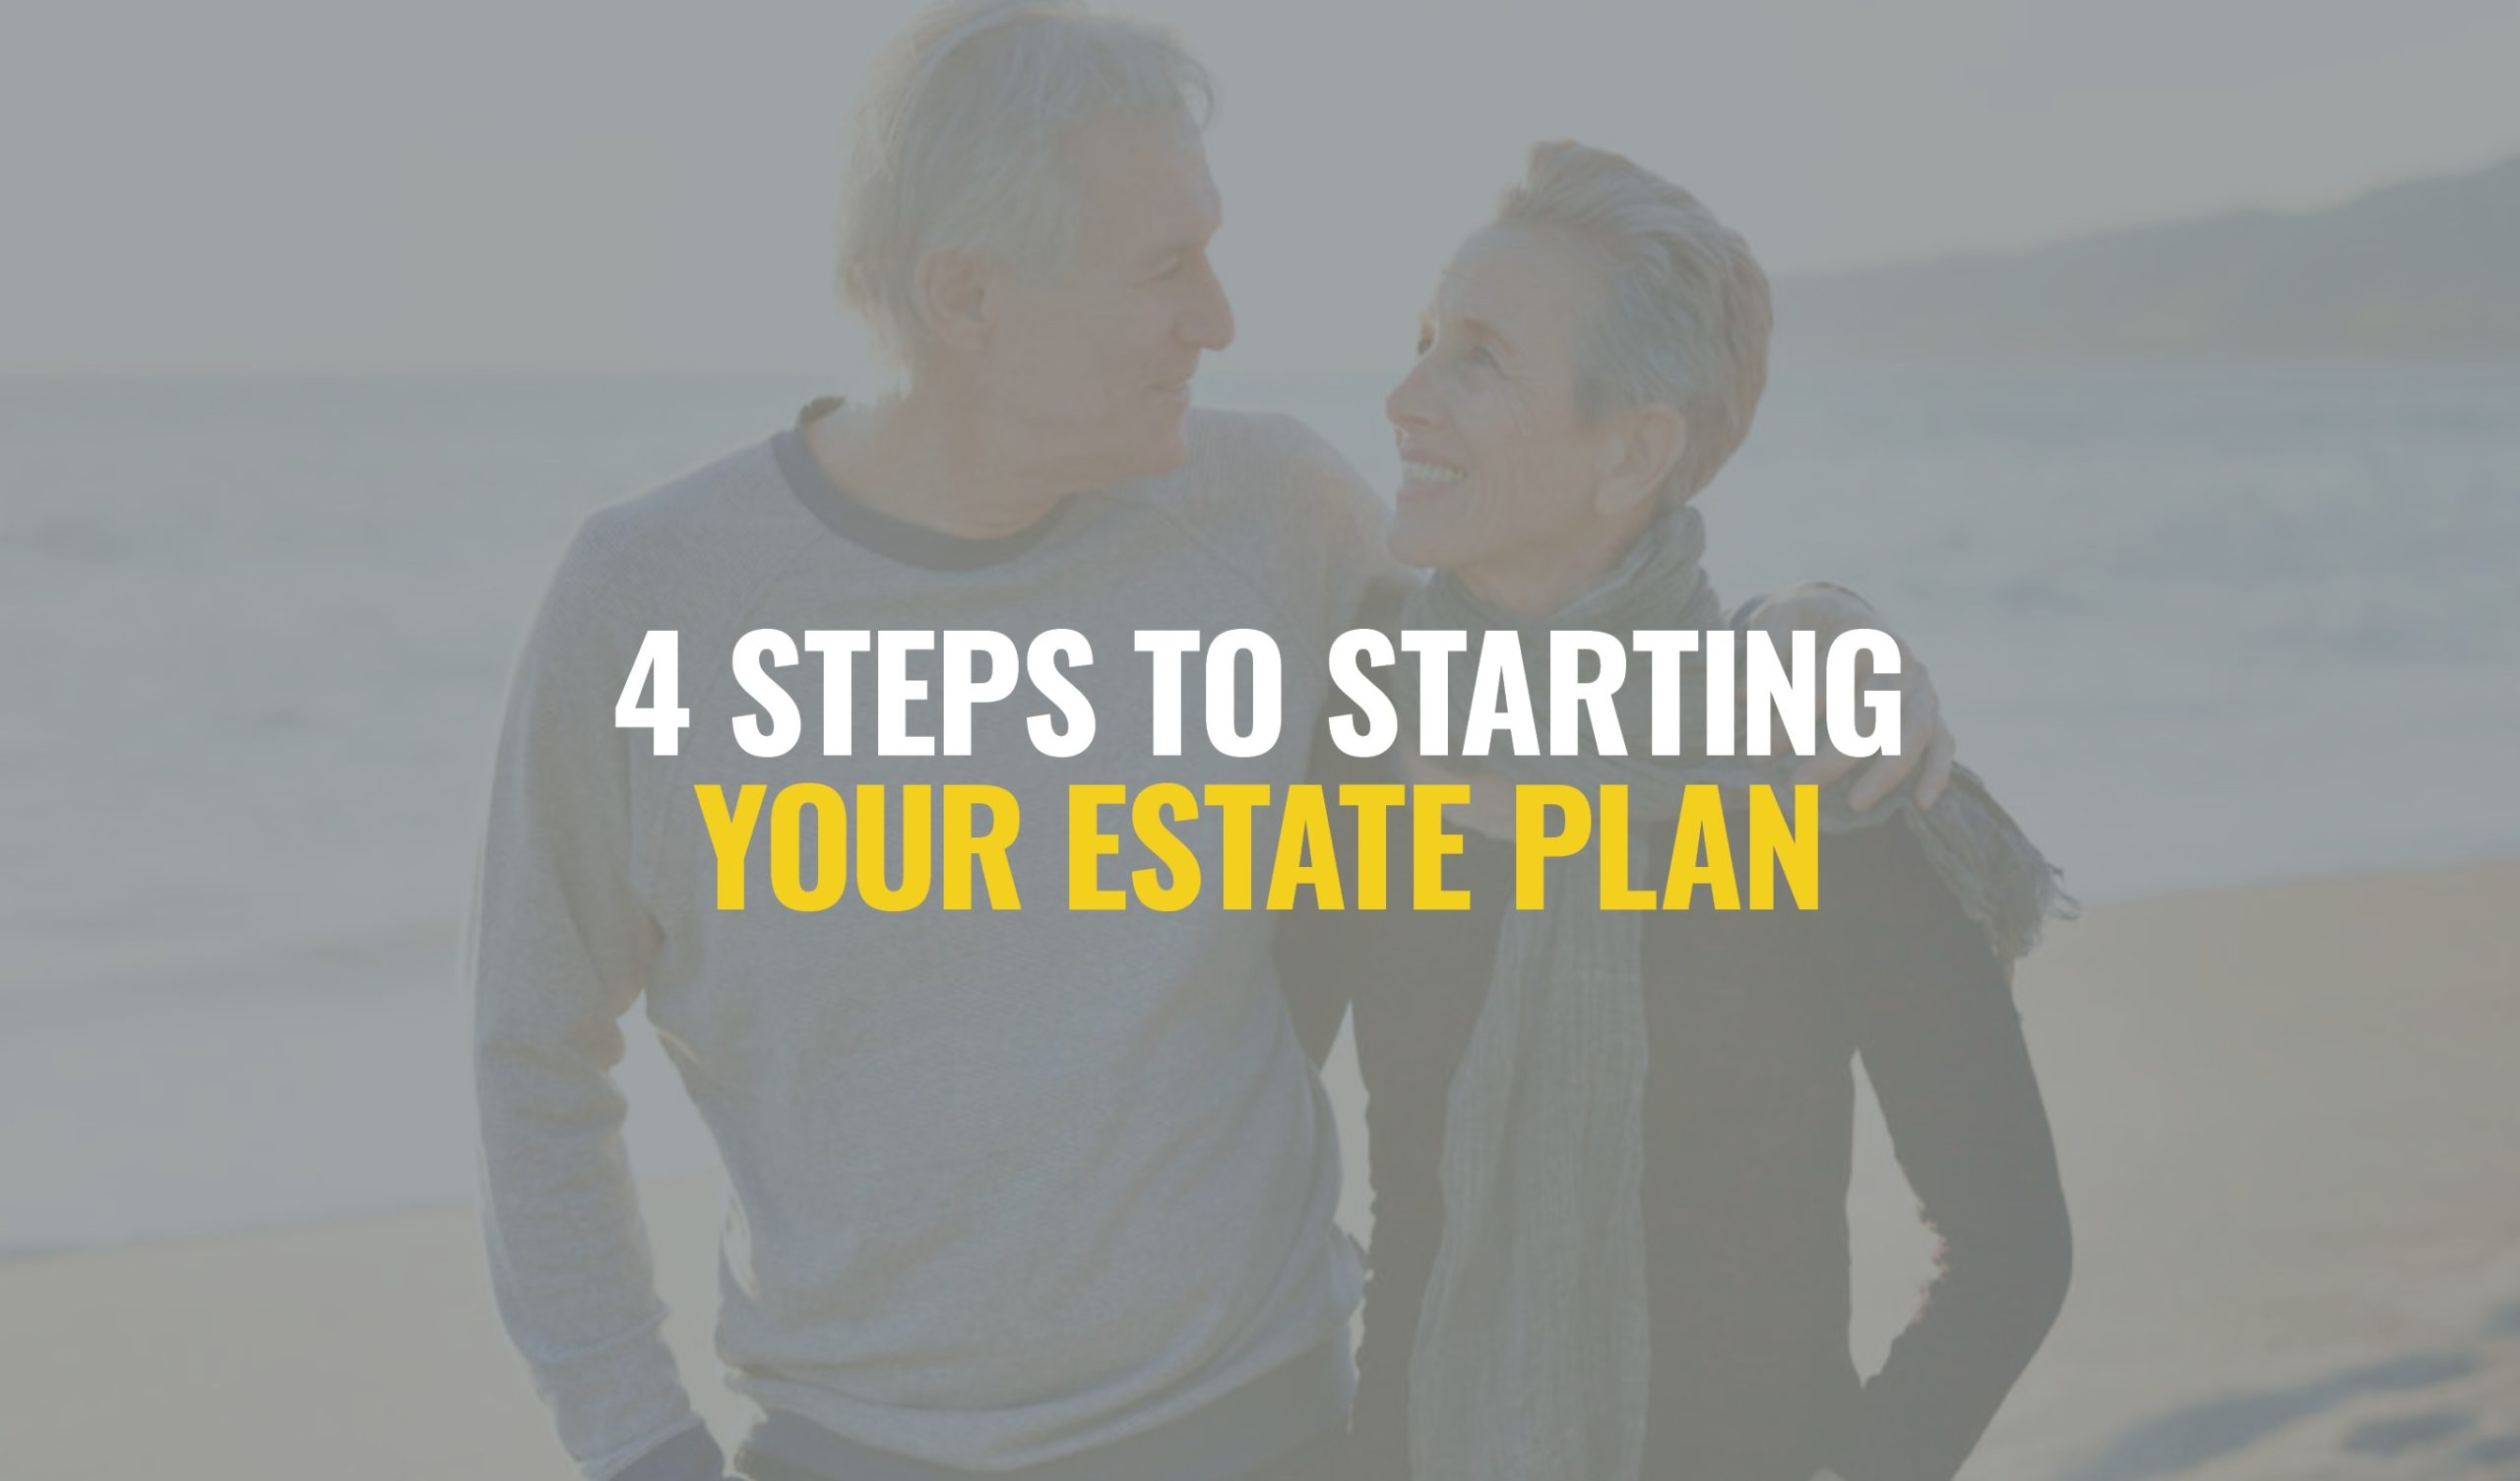 4 Steps to Starting Your Estate Plan